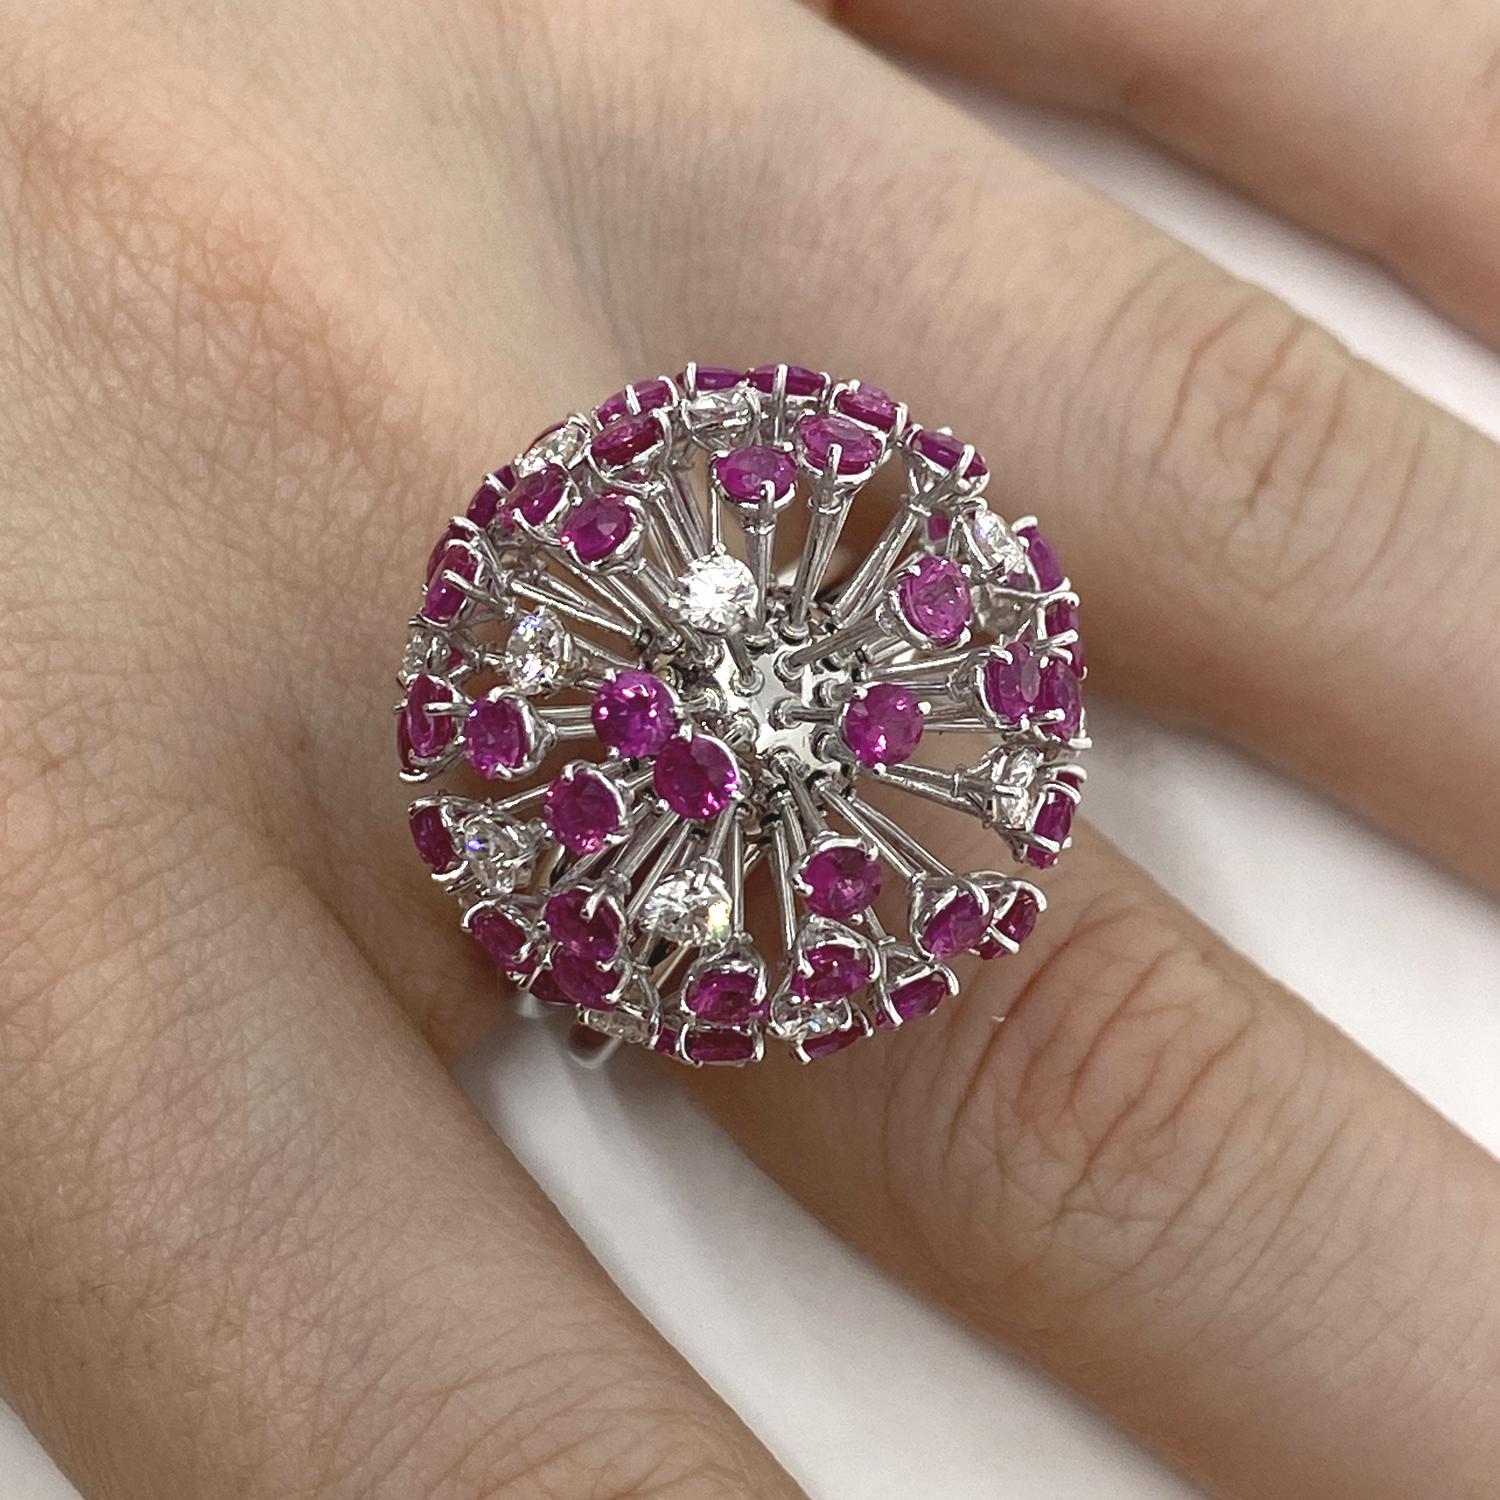 Ring made of 18kt white gold with natural brilliant-cut diamonds for ct.1.32 and natural pink sapphires for ct. 5.28 

Welcome to our jewelry collection, where every piece tells a story of timeless elegance and unparalleled craftsmanship. As a